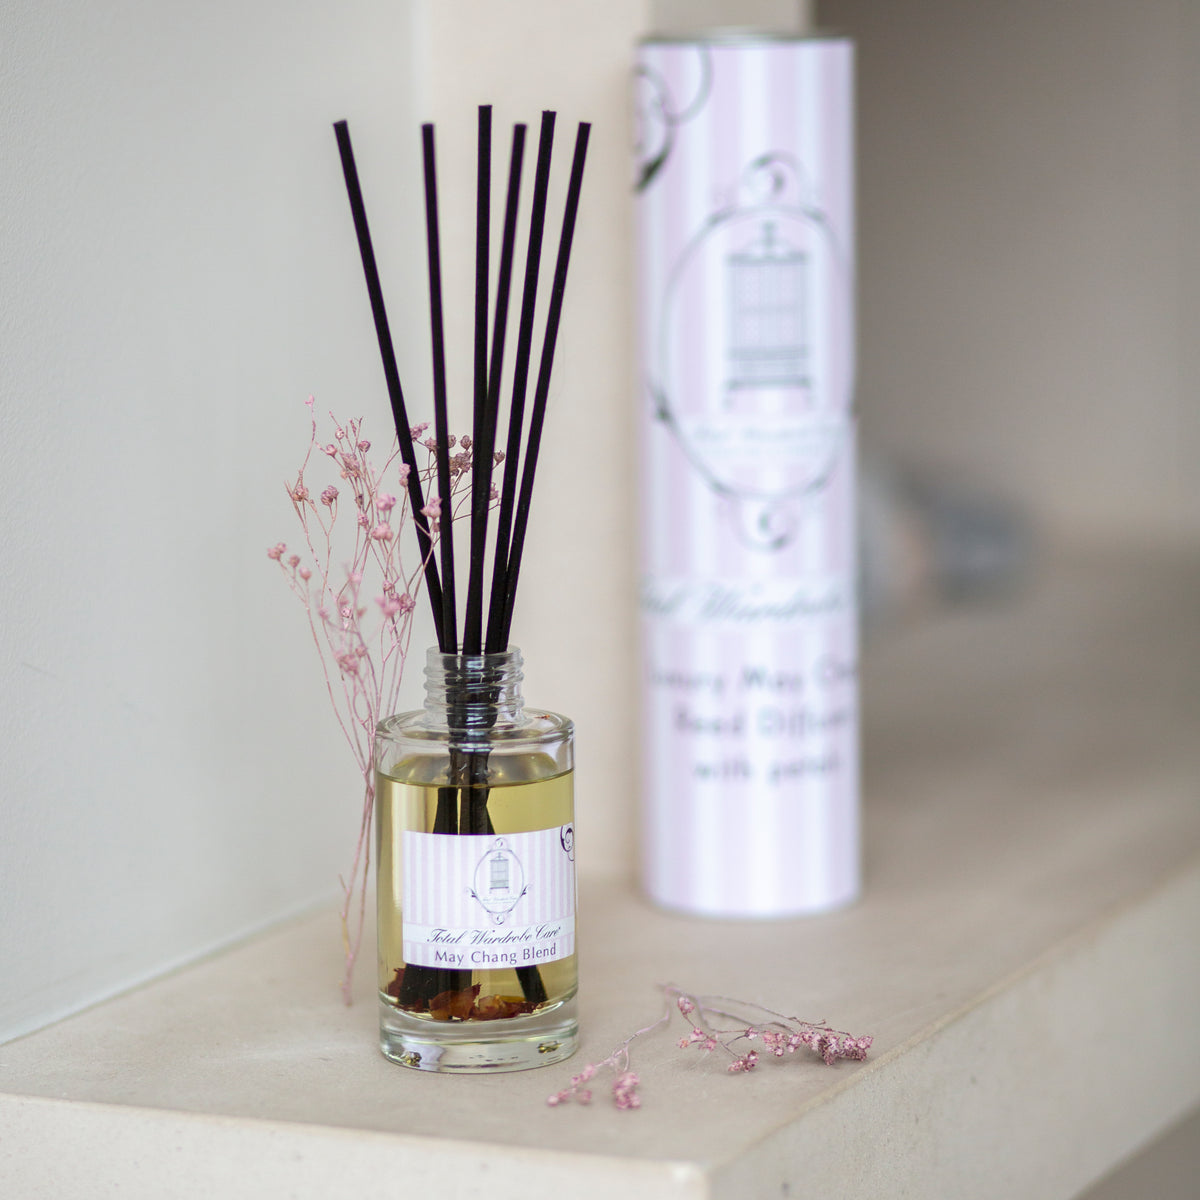 Luxury May Chang Reed Diffuser with small pink flowers